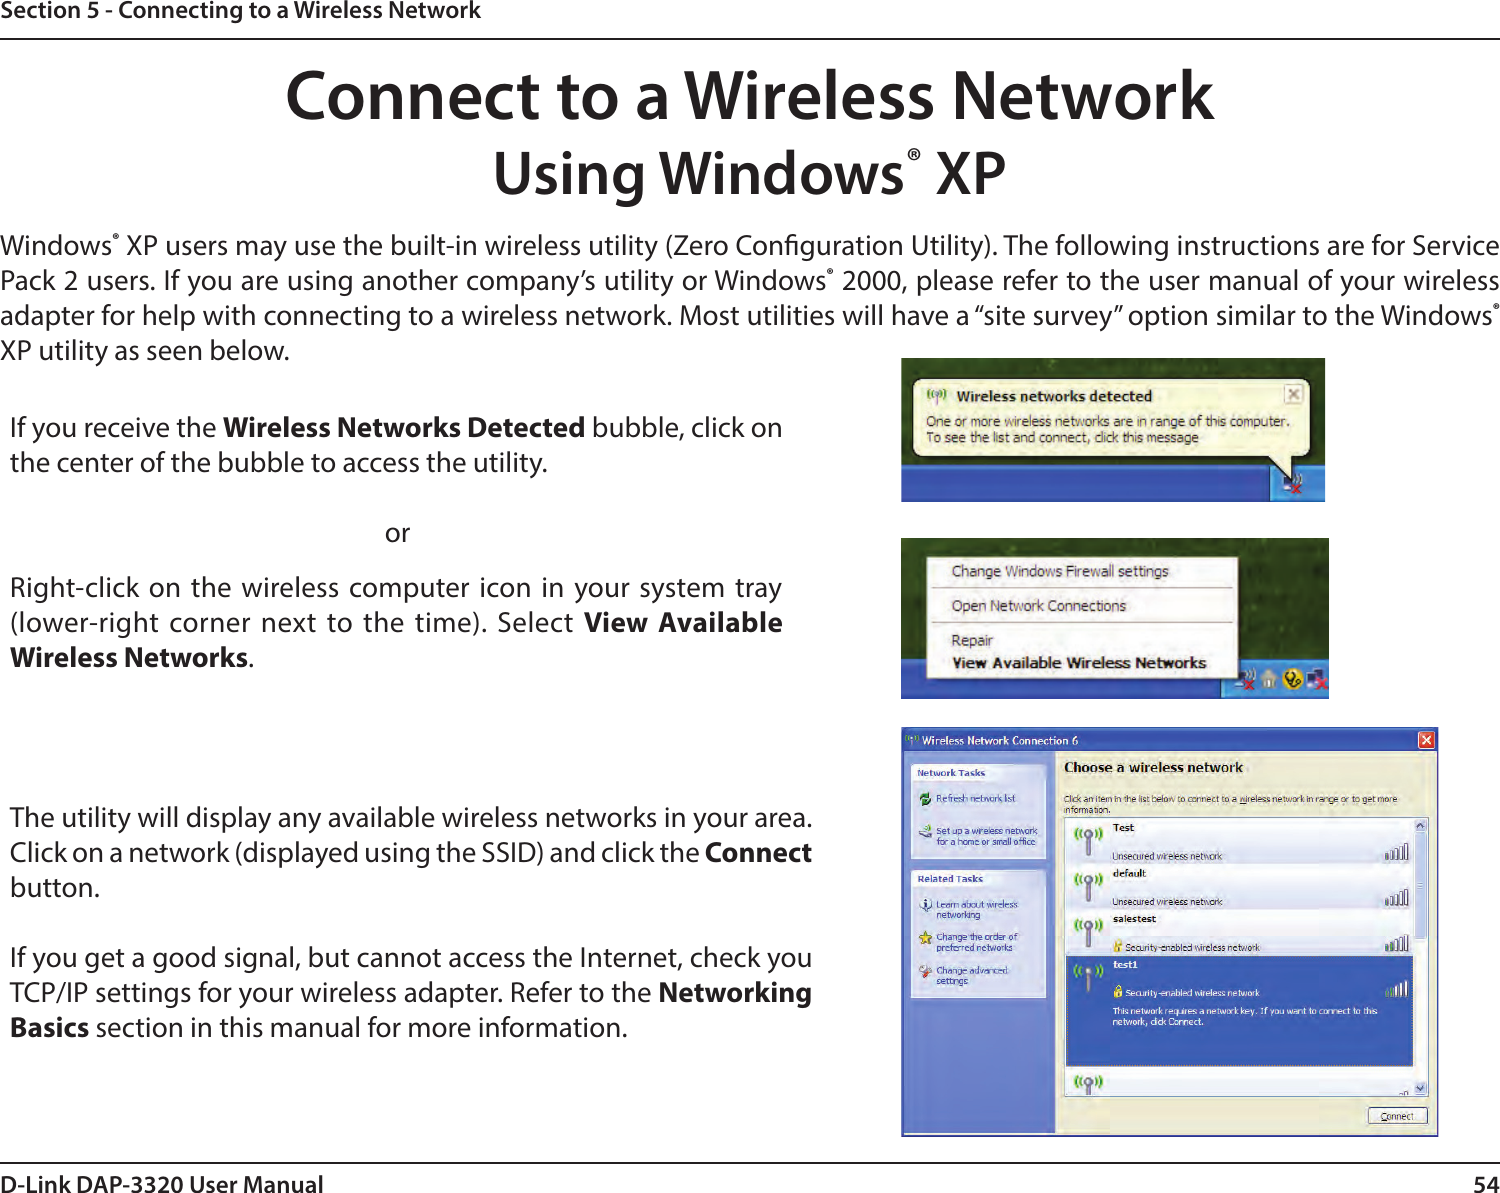 54D-Link DAP-3320 User ManualSection 5 - Connecting to a Wireless NetworkConnect to a Wireless NetworkUsing Windows® XPWindows® XP users may use the built-in wireless utility (Zero Conguration Utility). The following instructions are for Service Pack 2 users. If you are using another company’s utility or Windows® 2000, please refer to the user manual of your wireless adapter for help with connecting to a wireless network. Most utilities will have a “site survey” option similar to the Windows® XP utility as seen below.Right-click on the wireless computer icon in your system tray (lower-right corner next to the time). Select View Available Wireless Networks.If you receive the Wireless Networks Detected bubble, click on the center of the bubble to access the utility.     orThe utility will display any available wireless networks in your area. Click on a network (displayed using the SSID) and click the Connect button.If you get a good signal, but cannot access the Internet, check you TCP/IP settings for your wireless adapter. Refer to the Networking Basics section in this manual for more information.